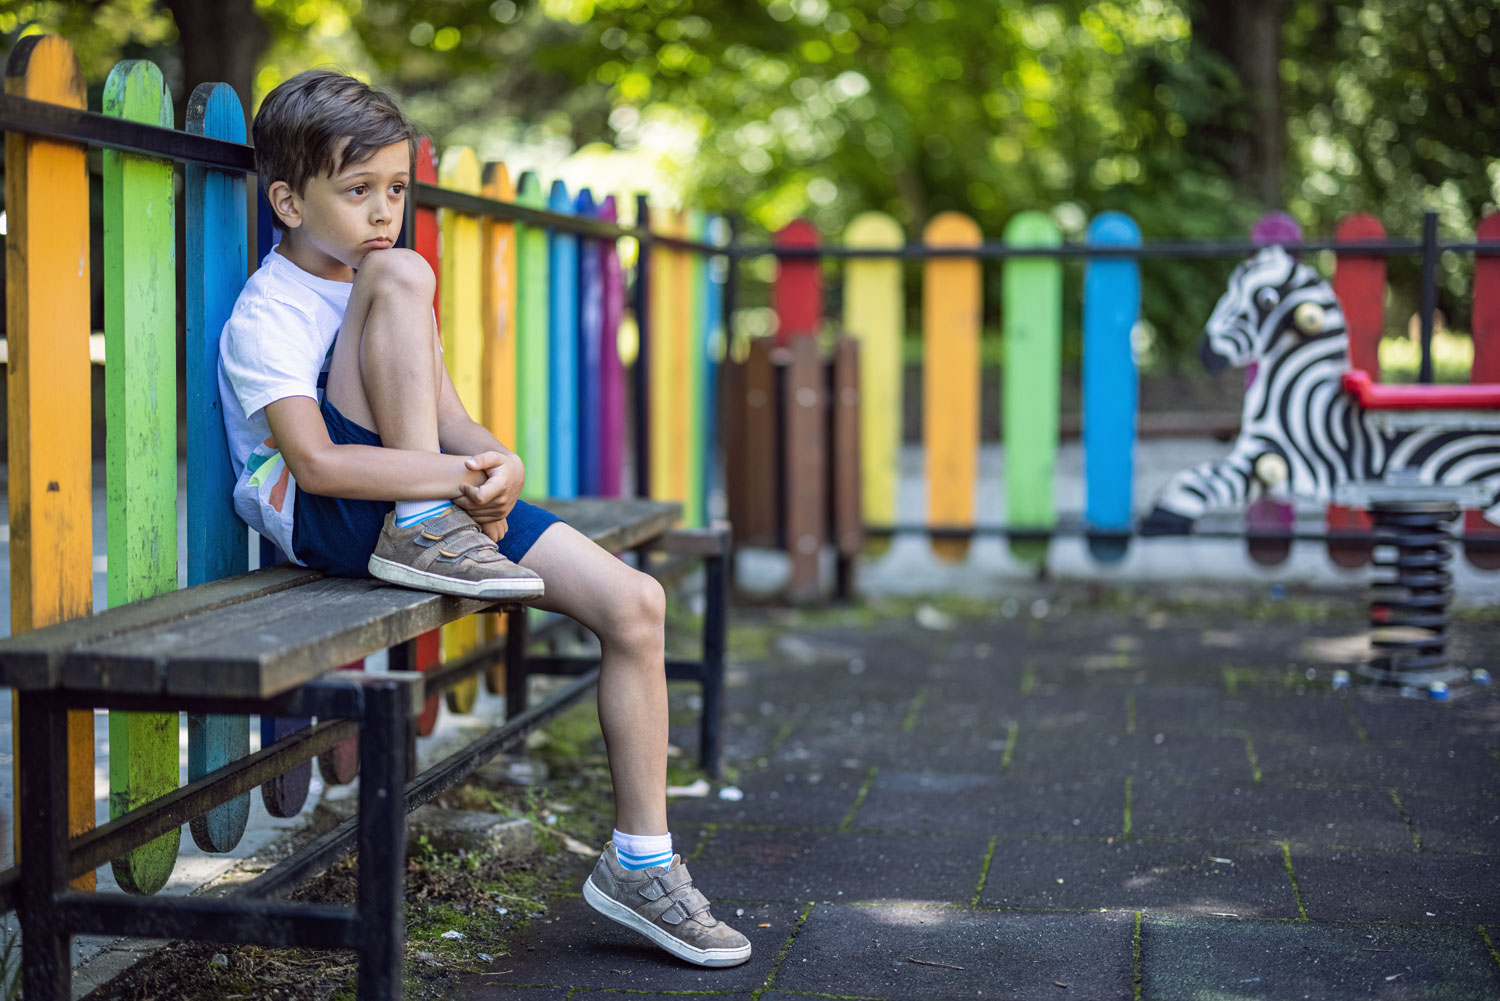 A young boy sits against a fence in a playground, appearing concerned.